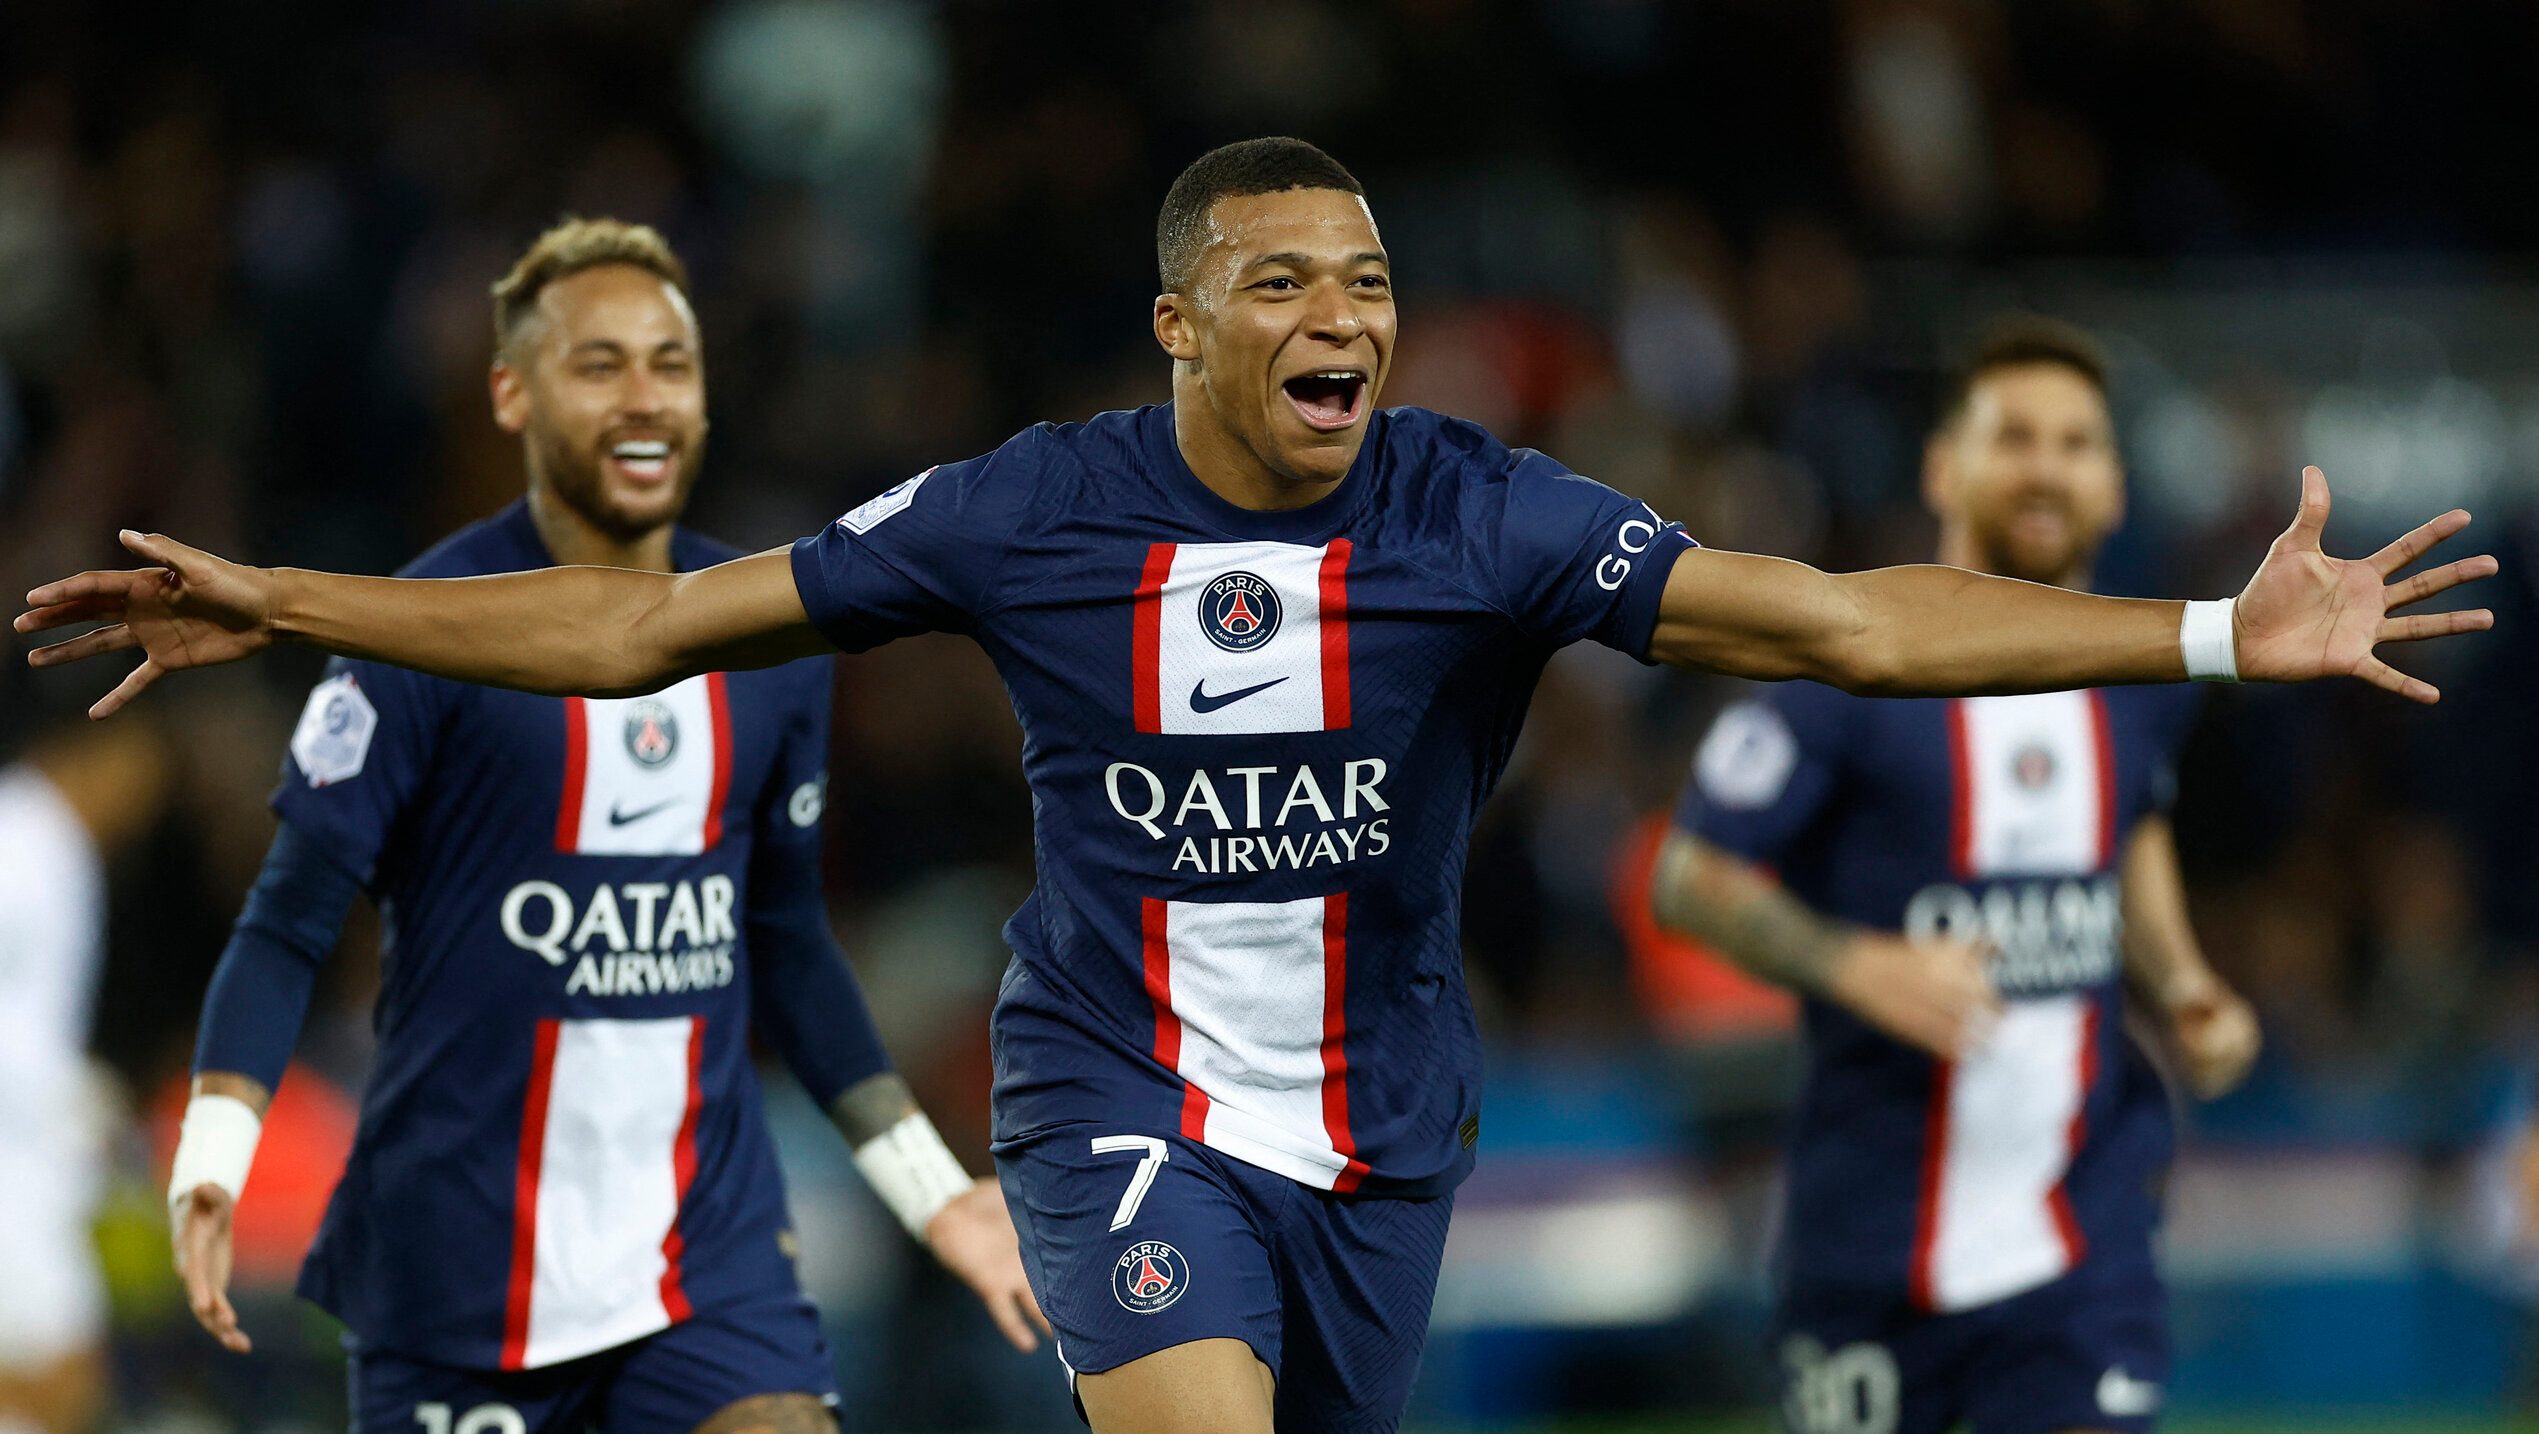 PSG’s Mbappe beats Messi and Ronaldo to top Forbes rich list